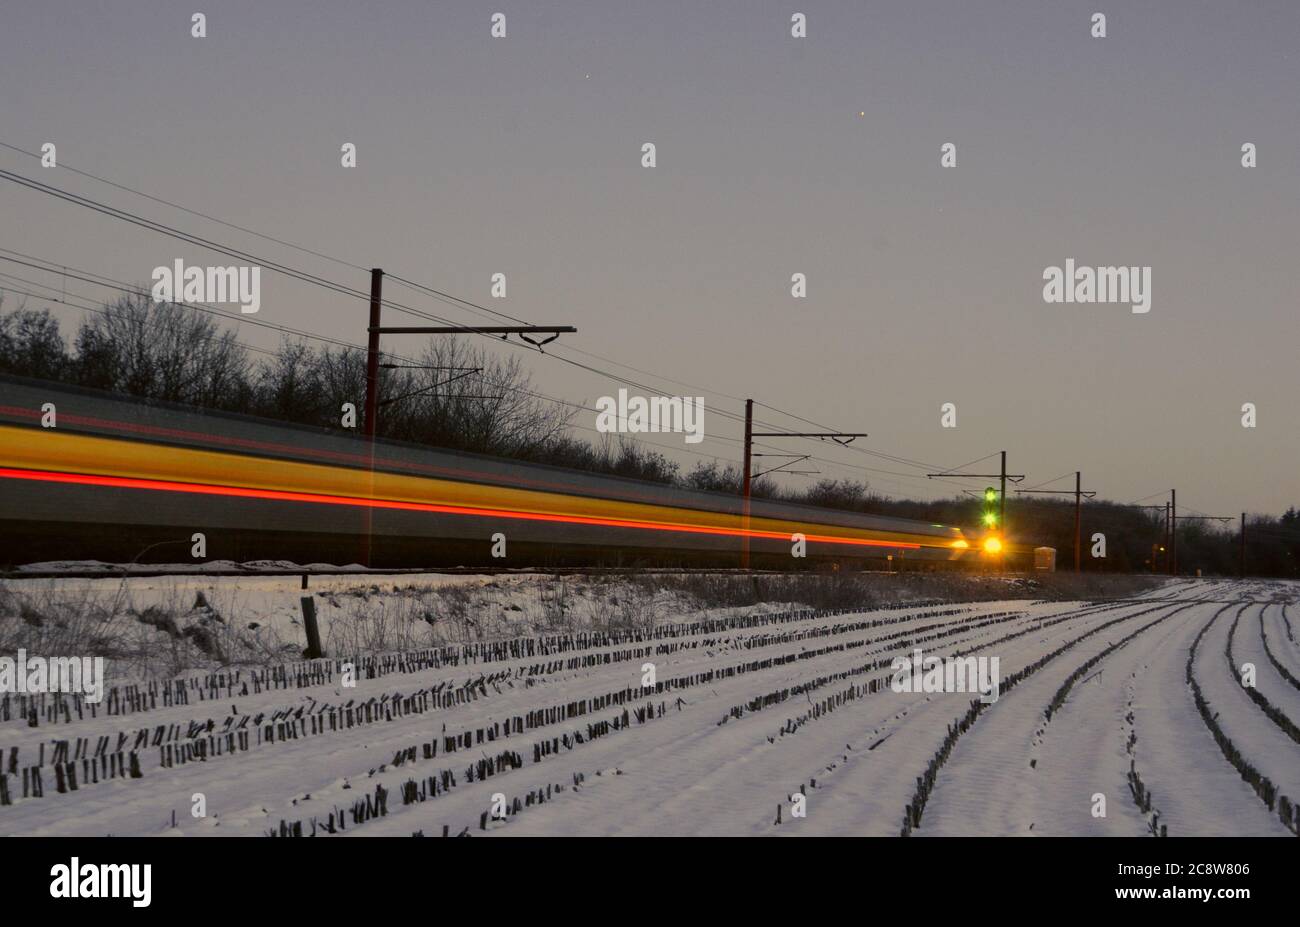 In the 'blue hour' during dawn of a cold winter's day, an international train passes Tinglev in Denmark, leaving light trails during the long time exp Stock Photo